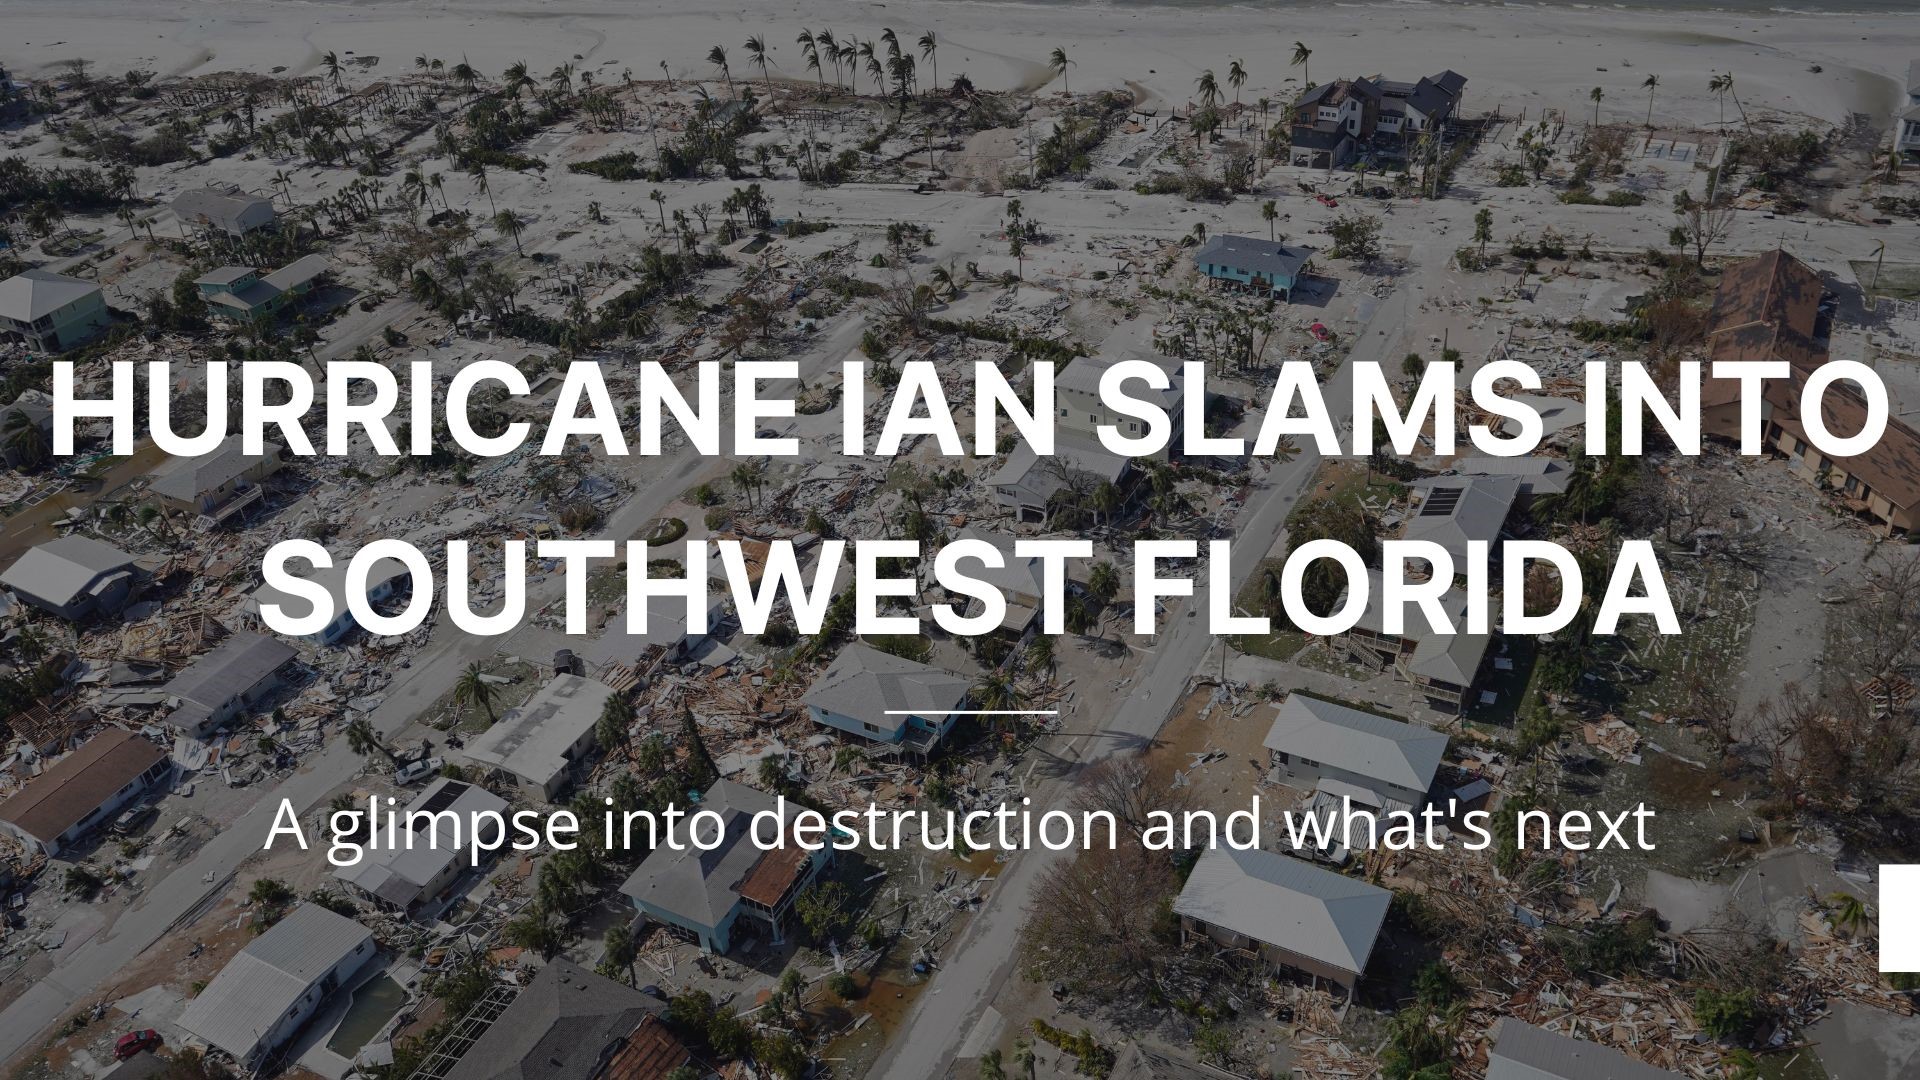 A look at the damage as Hurricane Ian hit southwest Florida on September 29, 2022. How other states are helping, what to know about insurance policies and more.